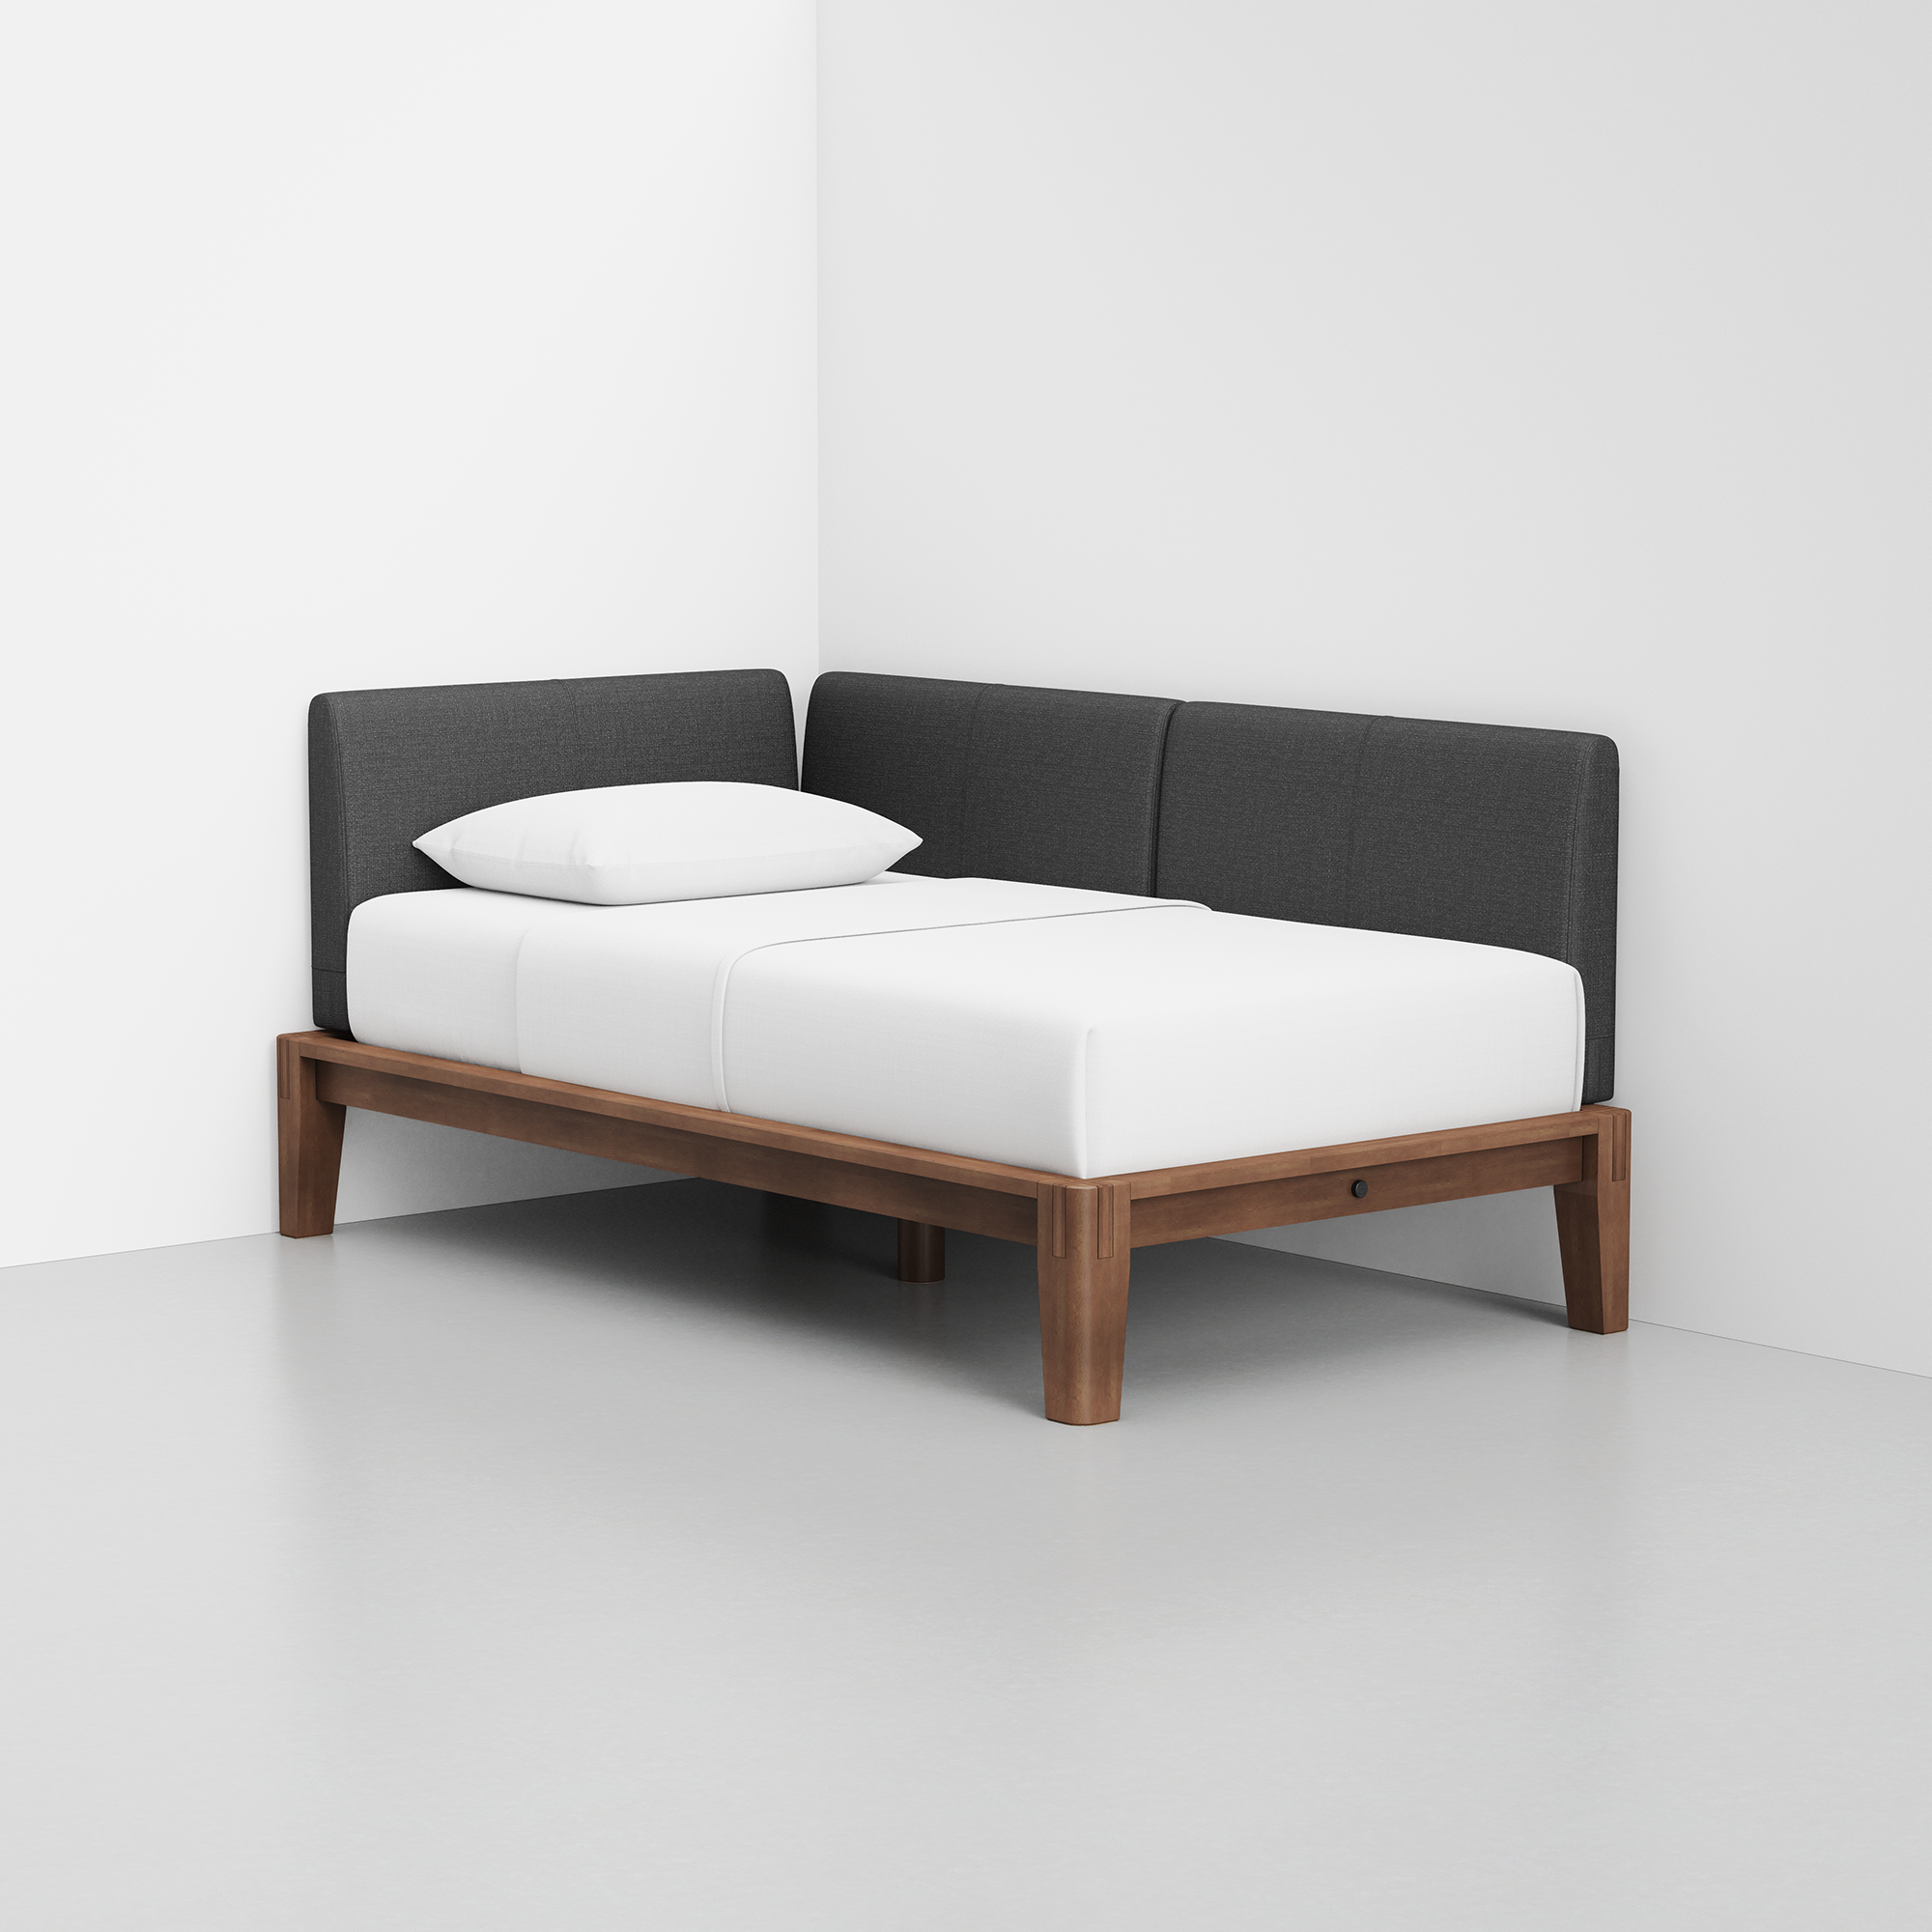 PDP Image: The Daybed (Walnut / Dark Charcoal) - Rendering - Front